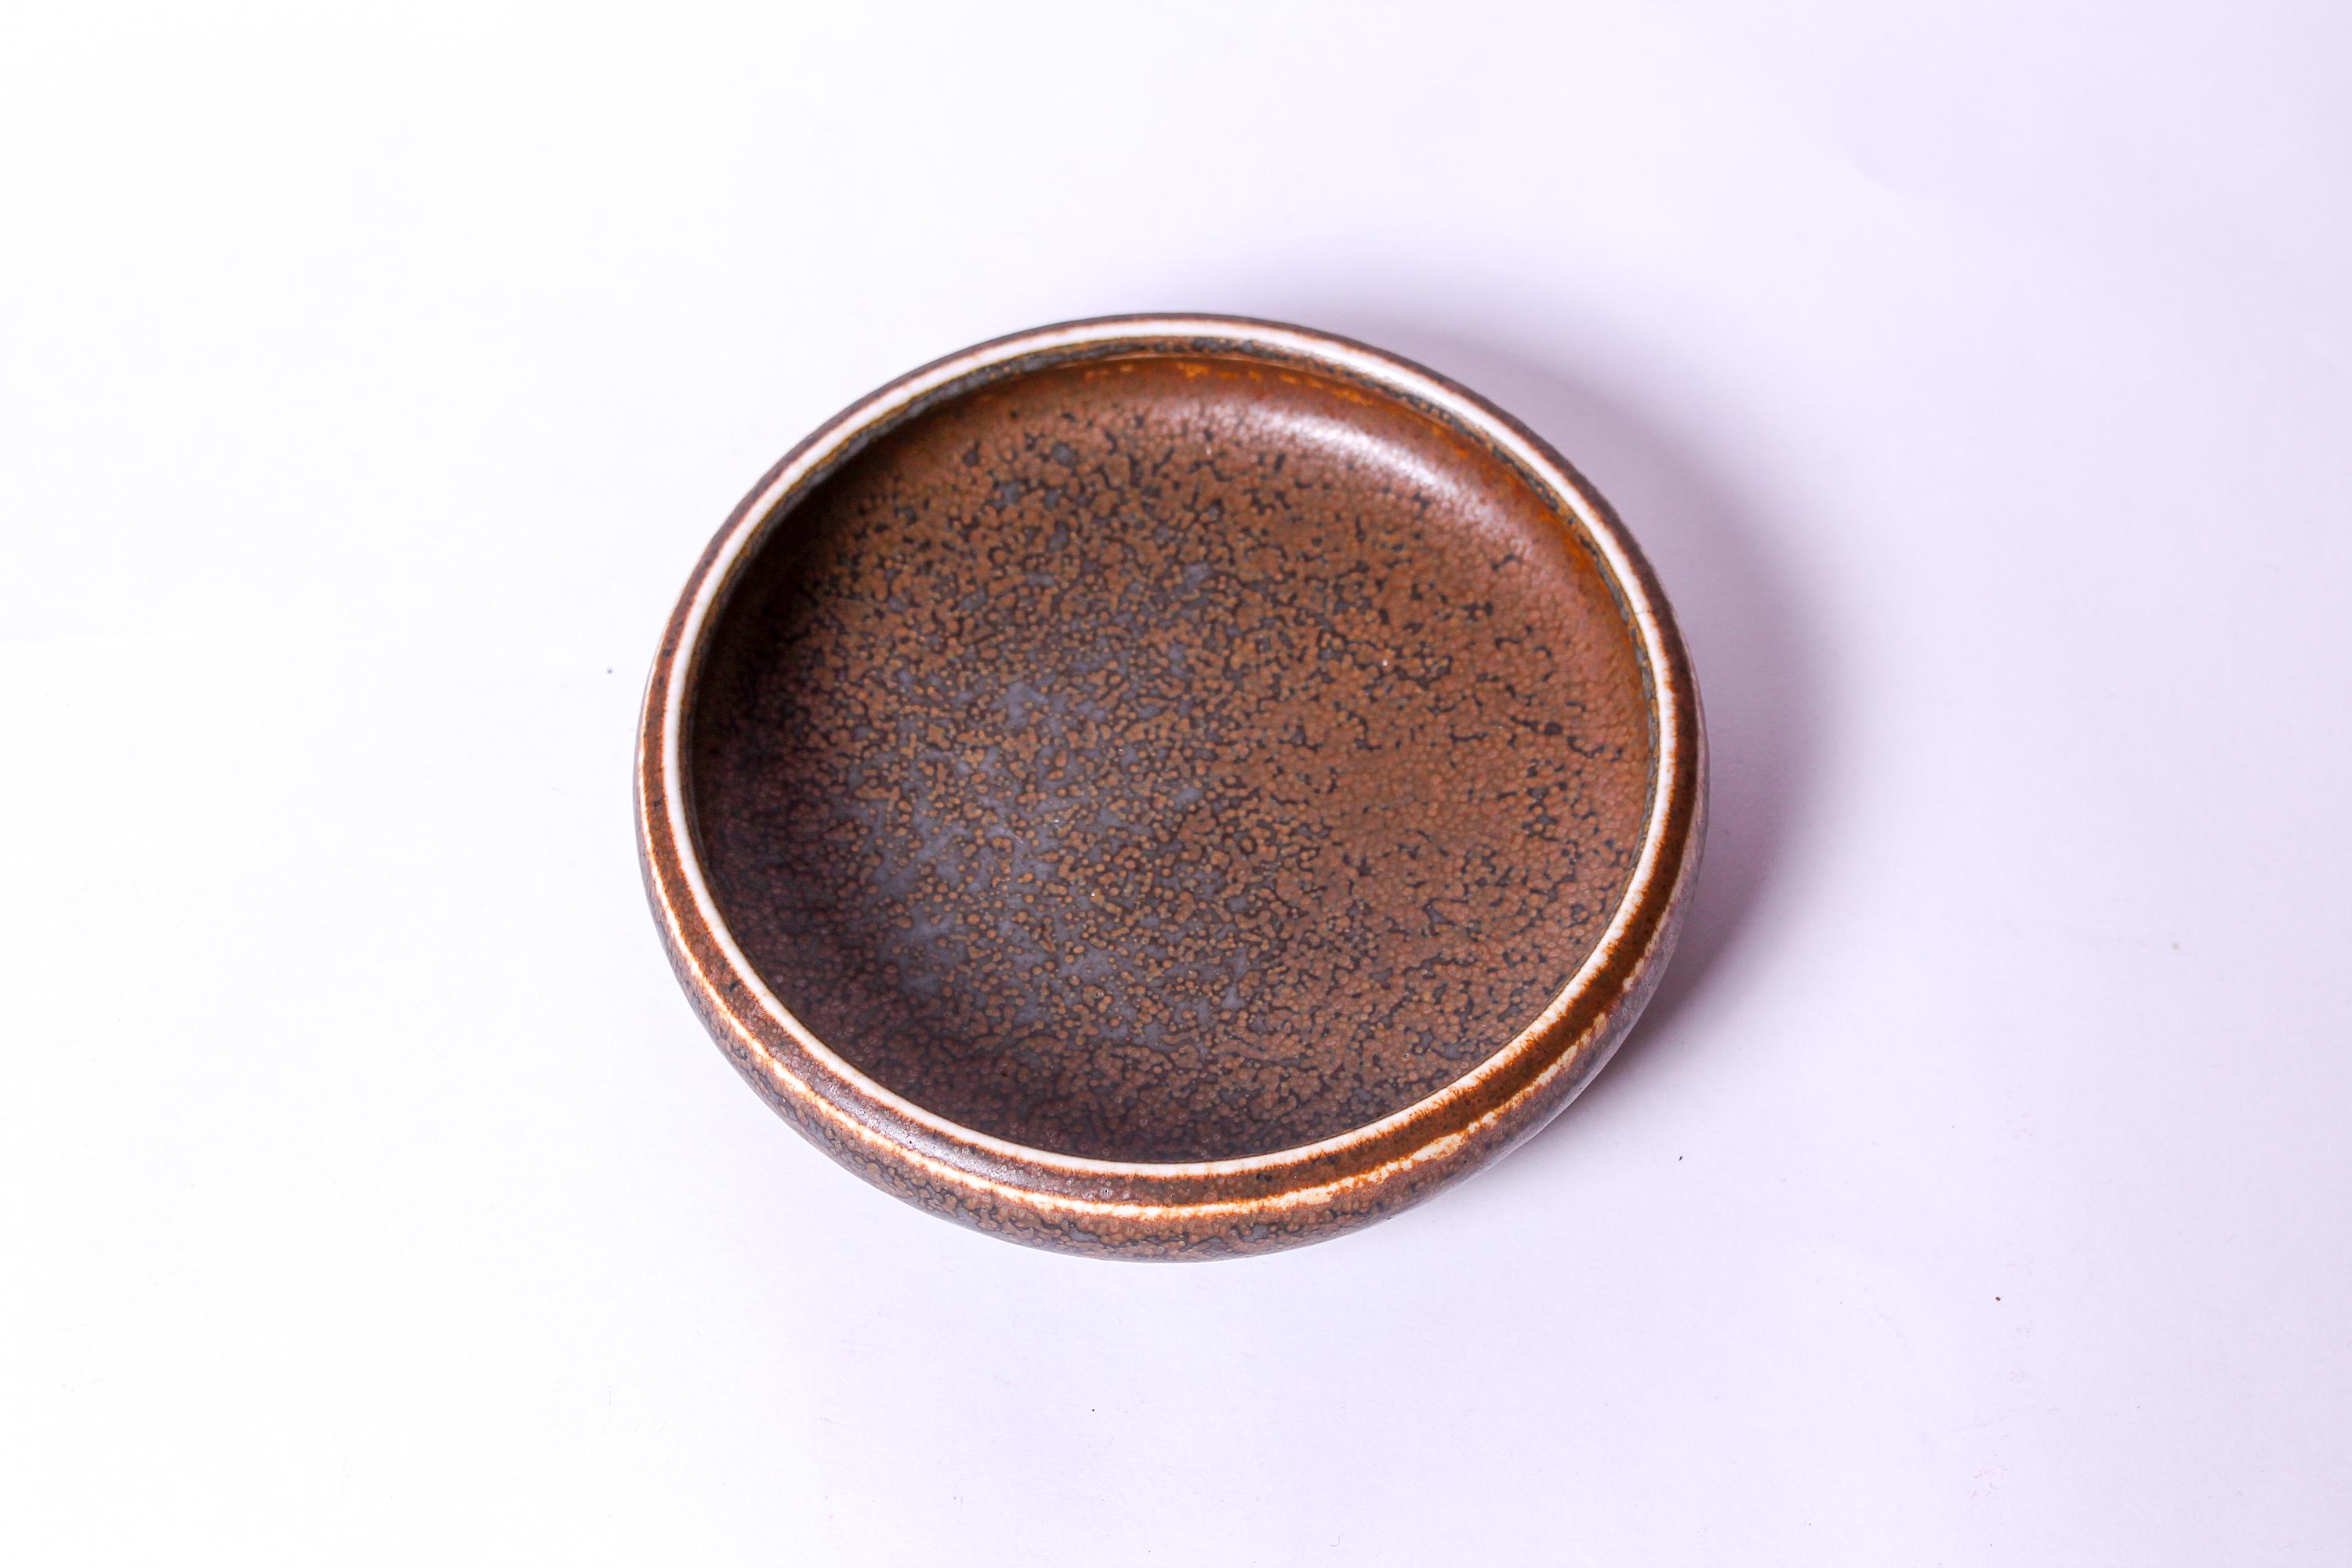 A midcentury ceramic bowl designed by Swedish designer Carl-Harry Stålhane. The bowl is of a large model with beautiful glaze. Its in very good vintage condition with small signs of usage consistent with age. Marked with both manufacture stamp by